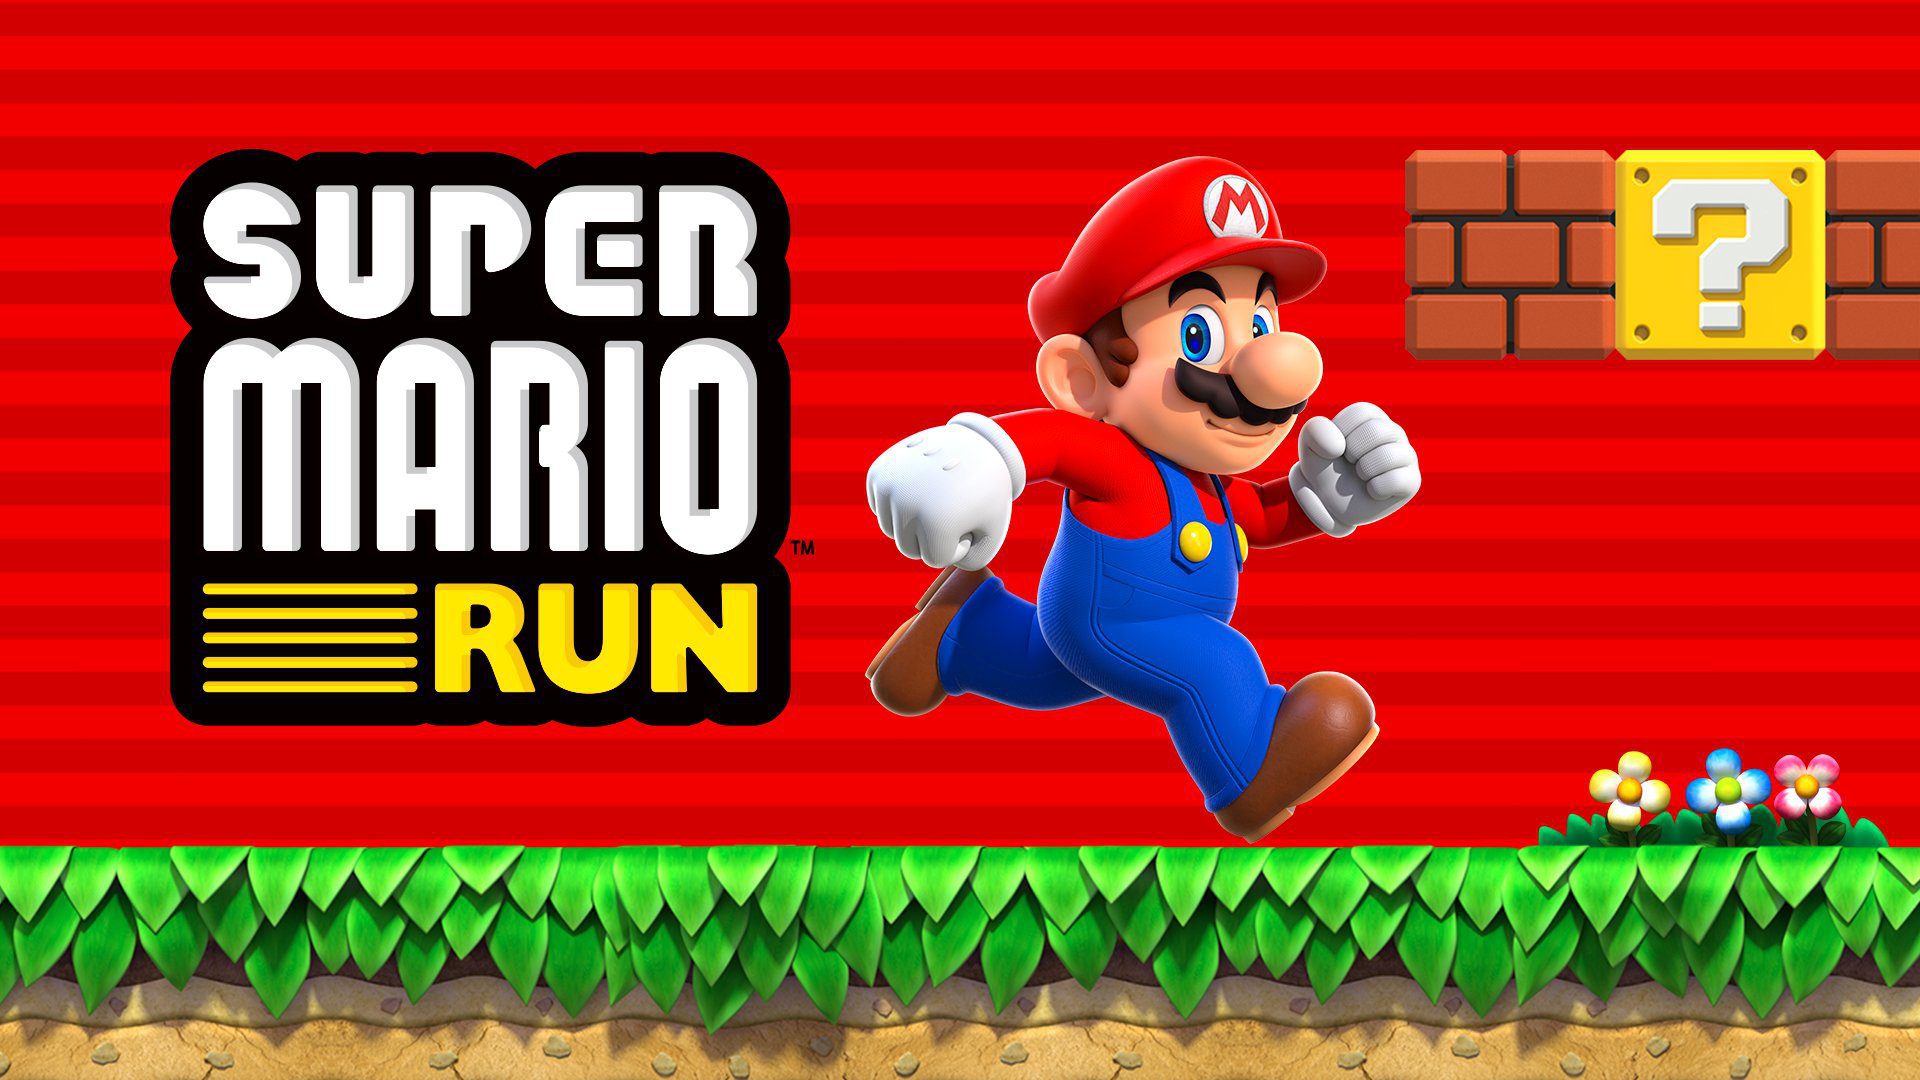 Super Mario Run hits Android on March 23